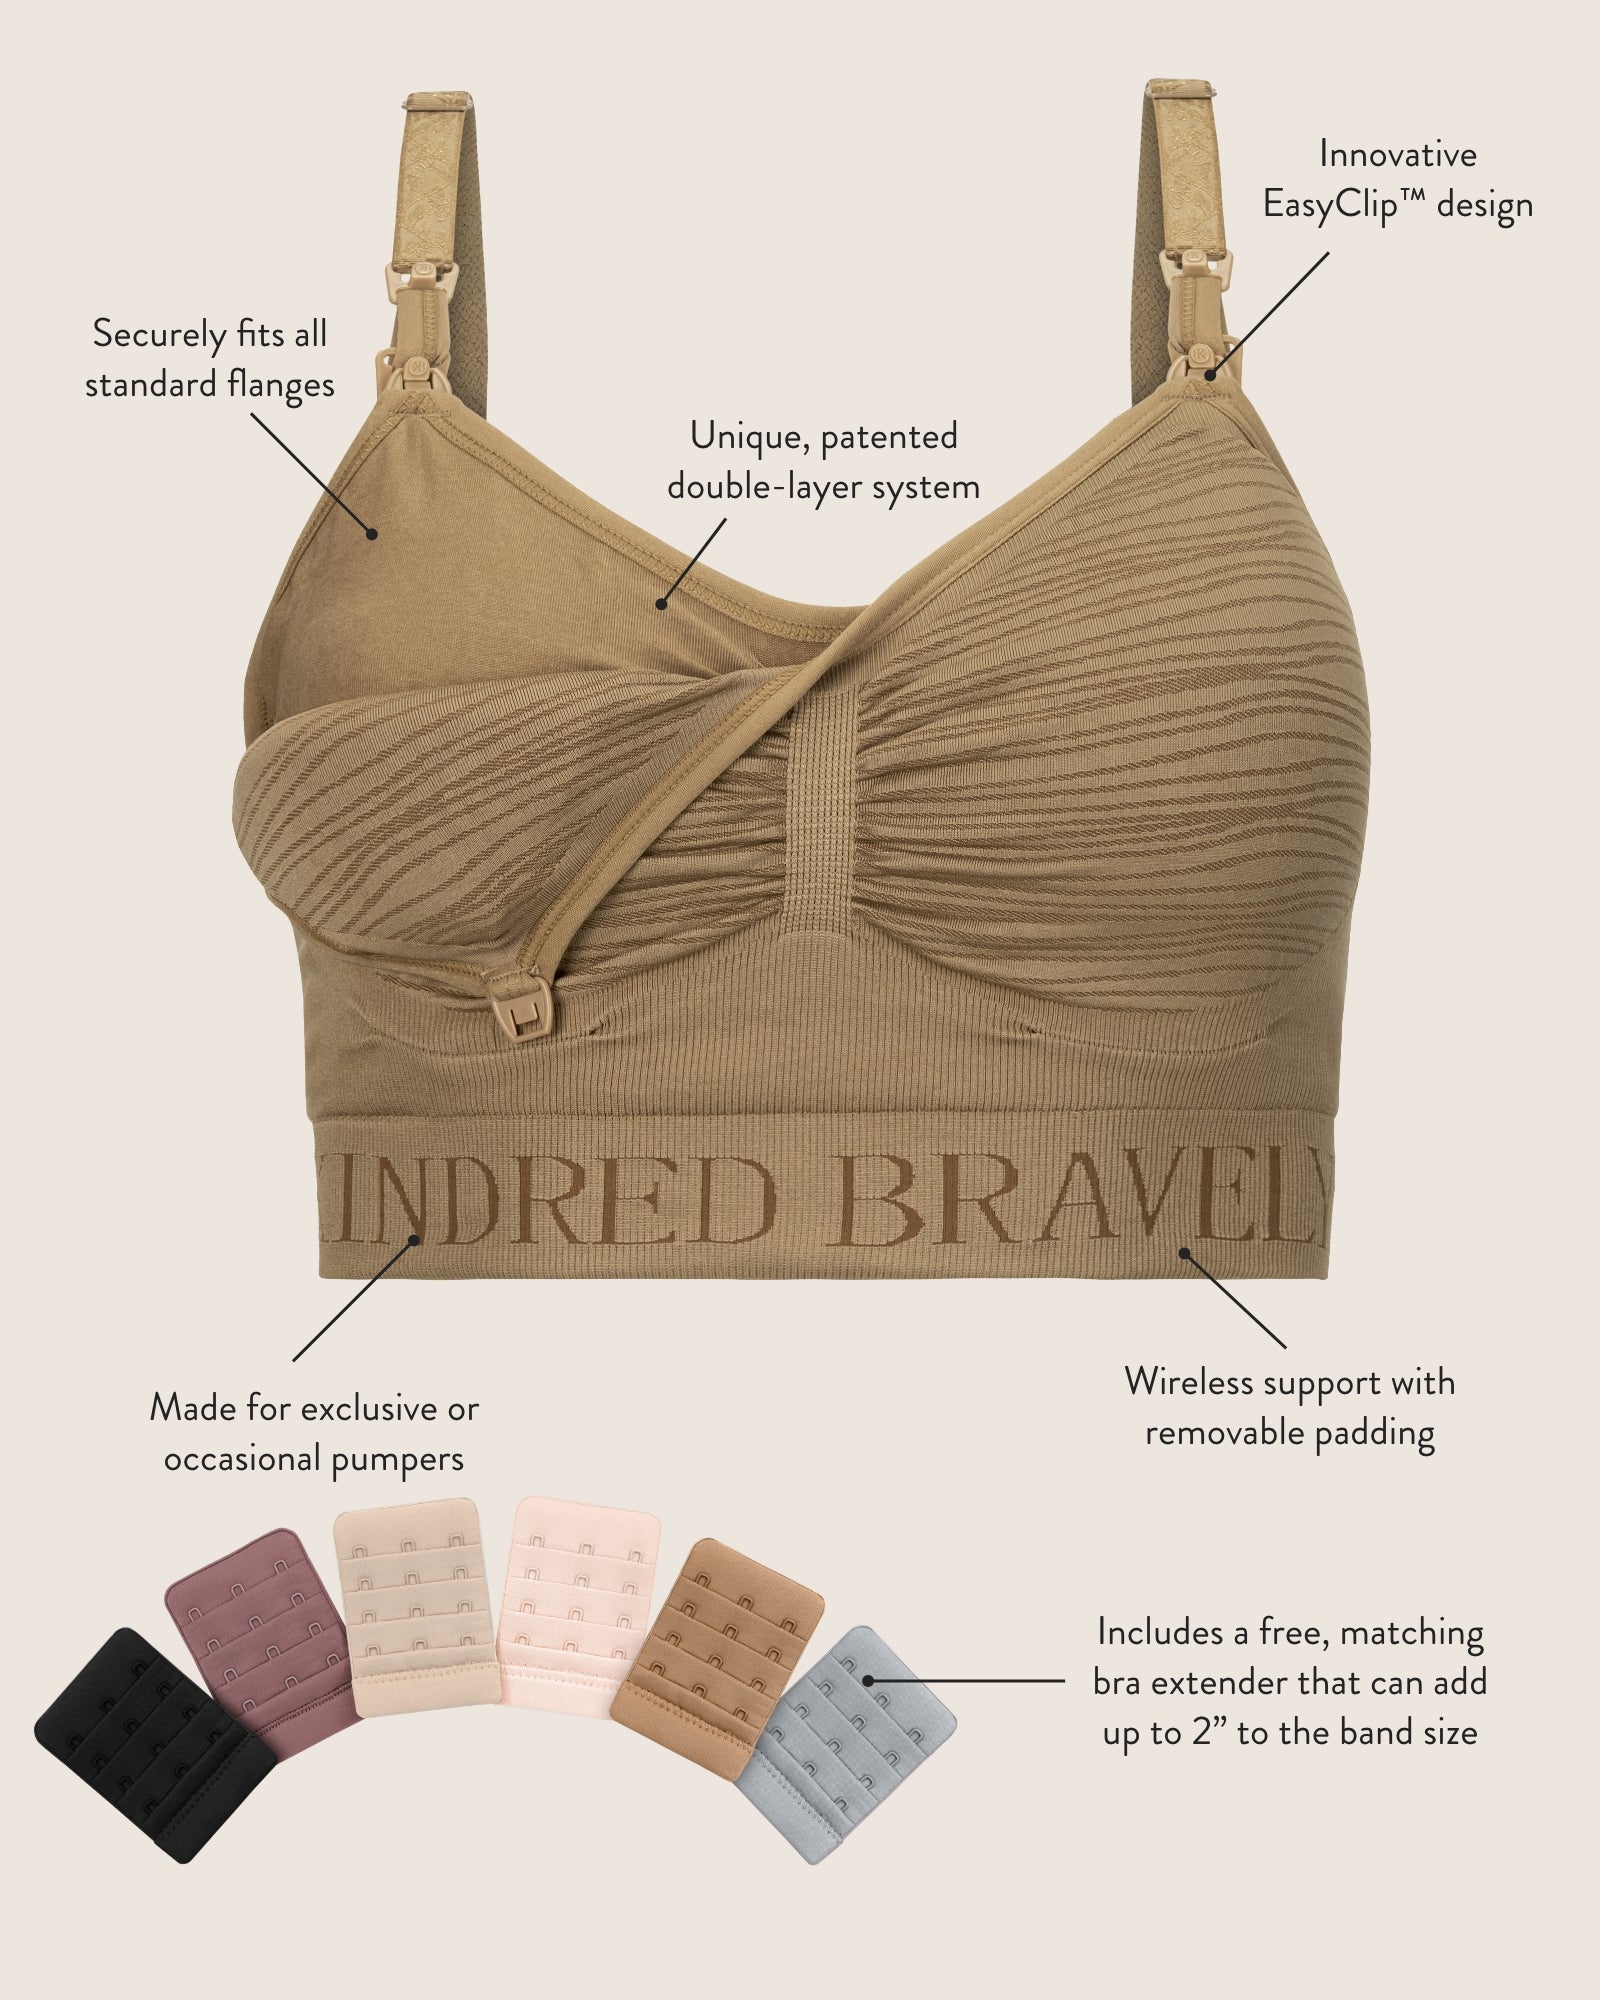 Shoppers In-Between Sizes Say This Best-Selling, On-Sale Bra Offers a  'Perfect Fit